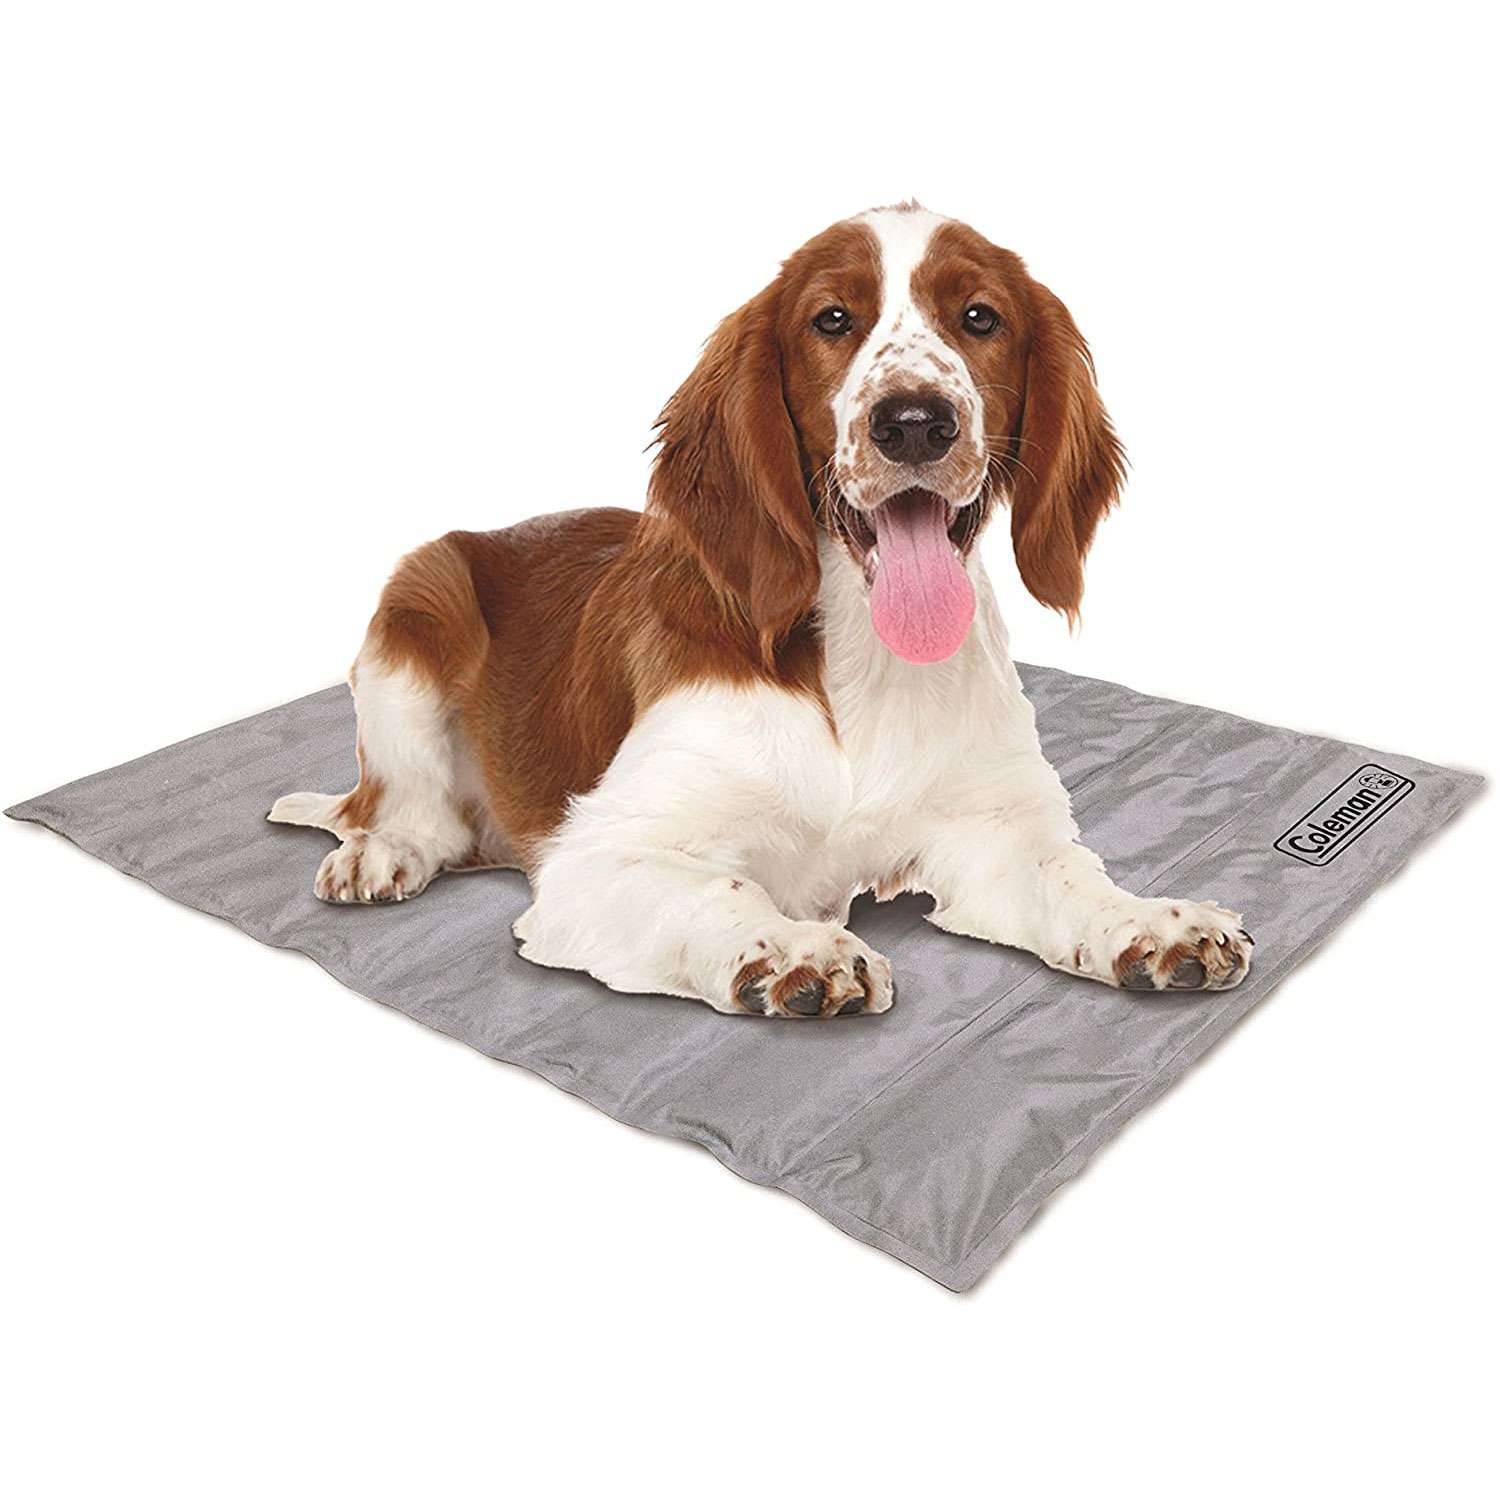 Ashley 60x45cm Summer Heat Relief Pet Cooling Gel Mat Bed for Dog/Cat